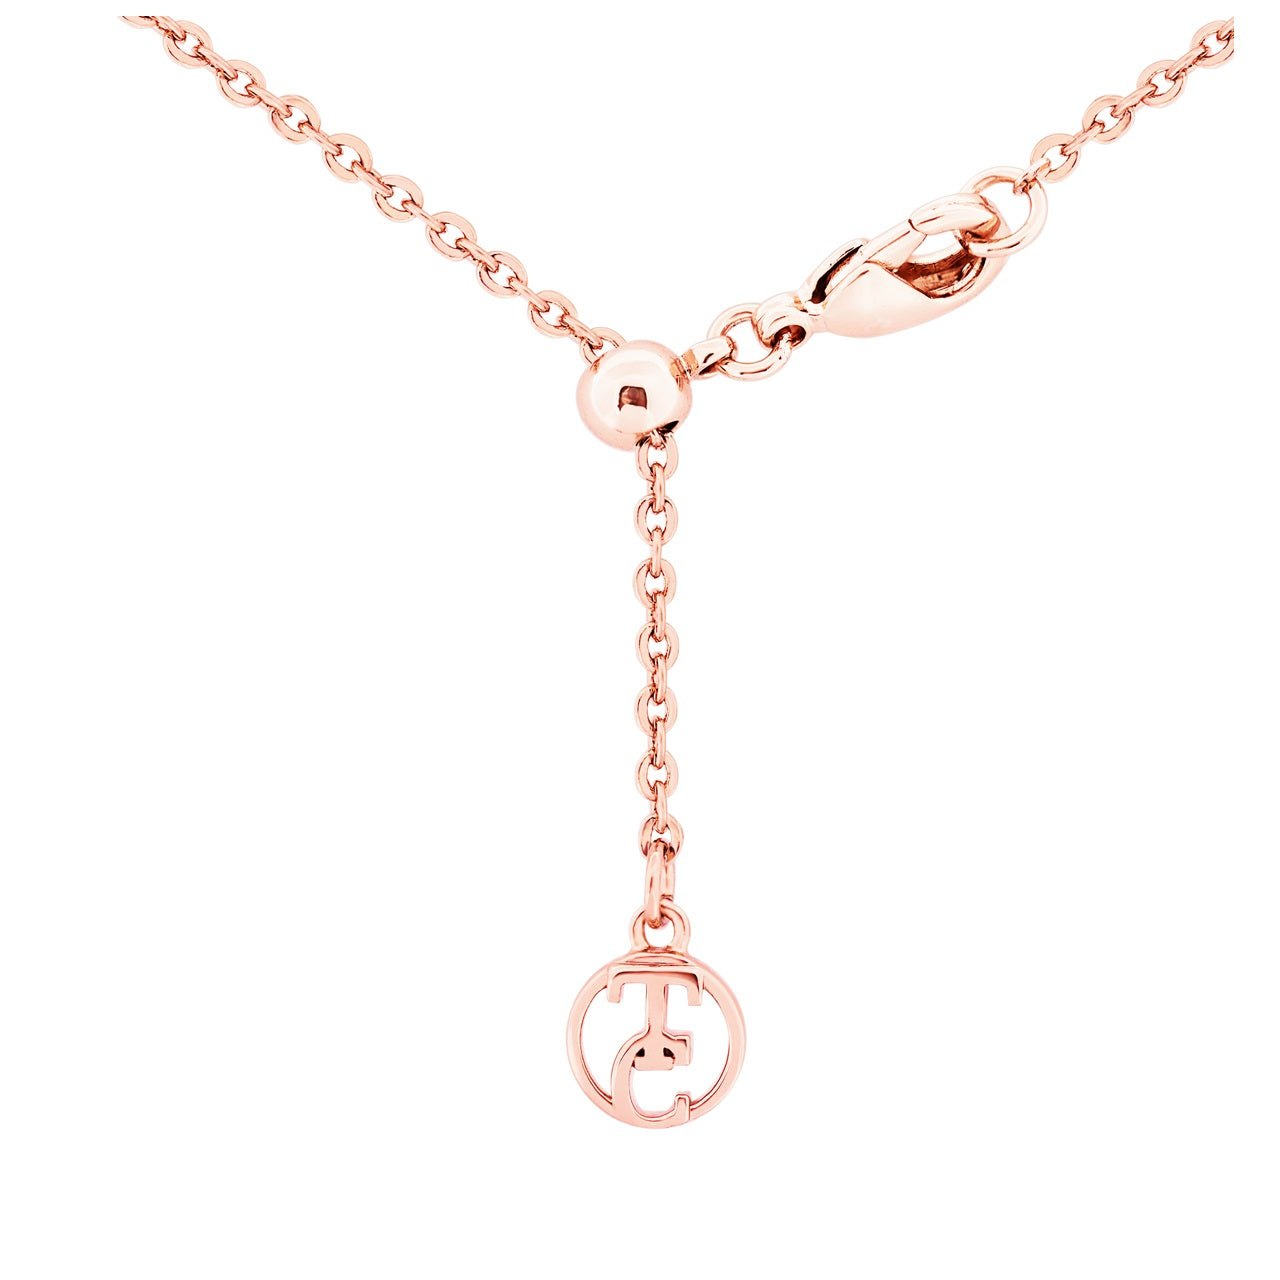 Tipperary Crystal Butterfly Rose Gold Pendant  Drawing inspiration from urban garden, the Tipperary Crystal Butterfly collection transforms an icon into something modern and unexpected. Playful and elegant, this collection draws from the inherent beauty of the butterfly.